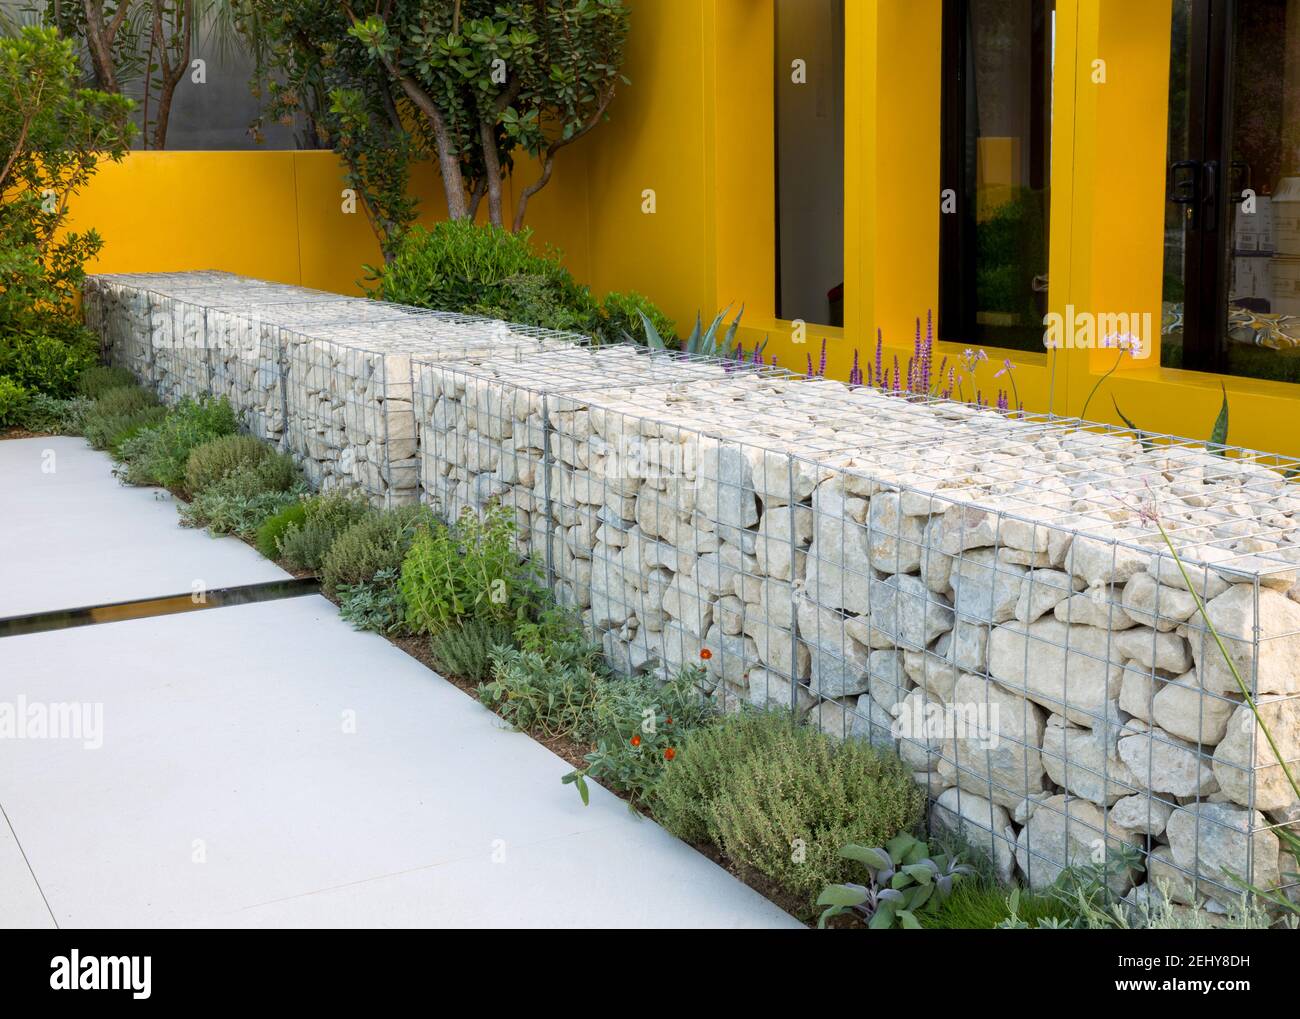 Mediterranean garden with stone filled gabion wall, a border of mixed herbs and a grey stone patio with a rill water feature England GB UK Stock Photo